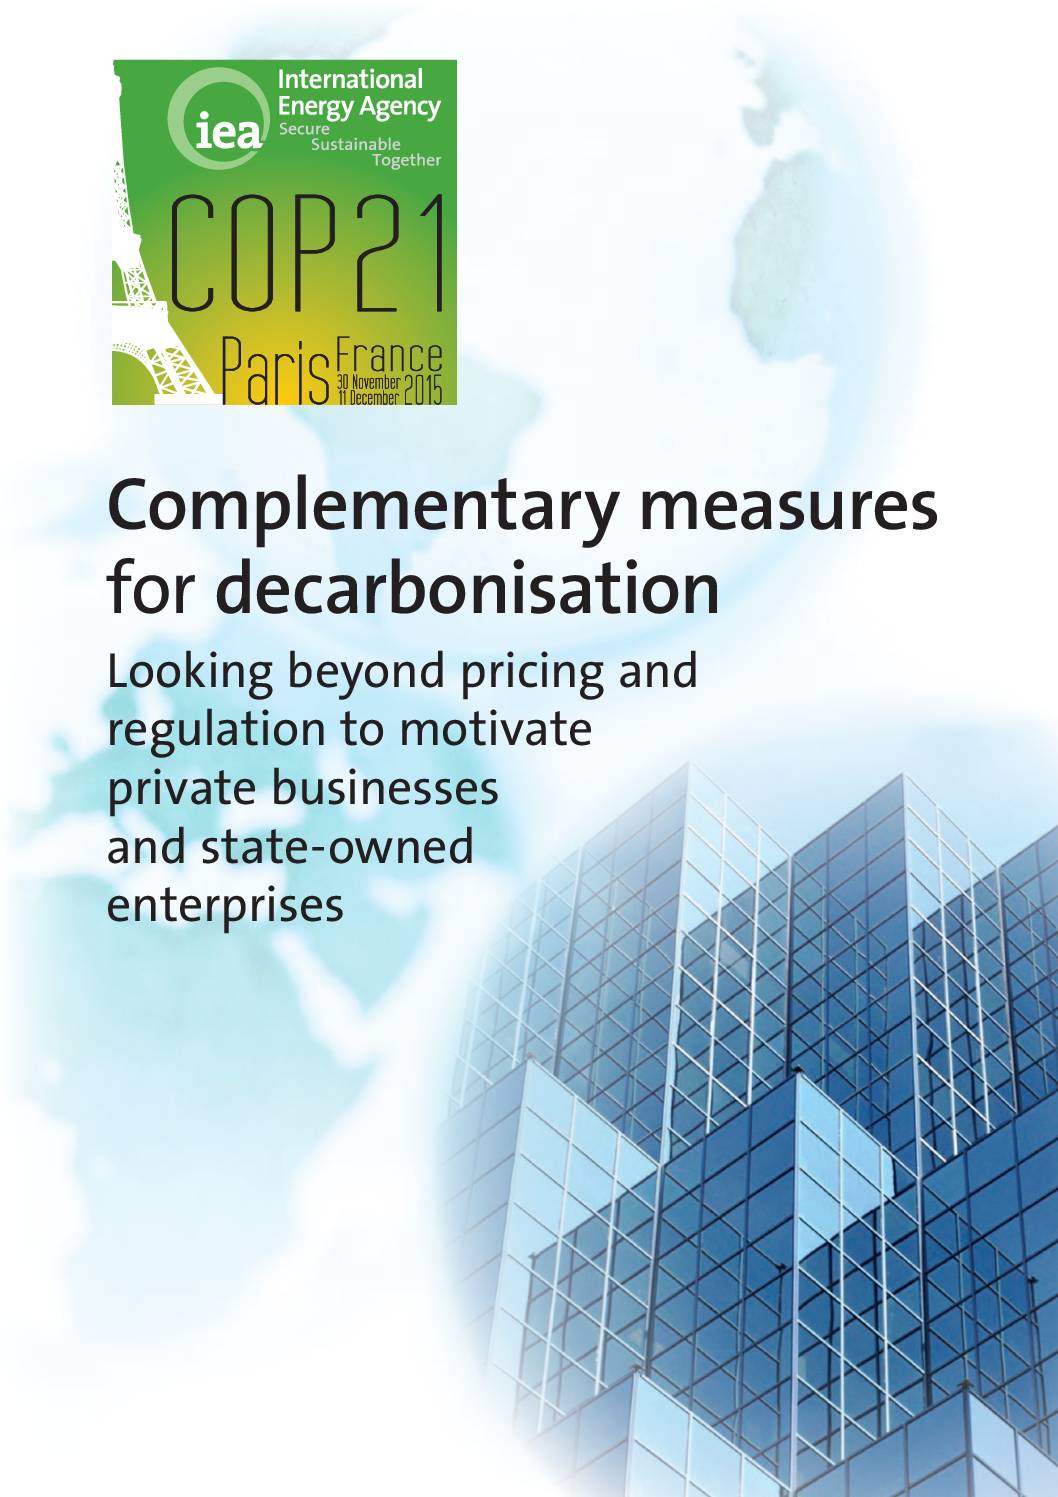 Complementary measures for decarbonisation: Looking beyond pricing and regulation to motivate private businesses and state-owned enterprises